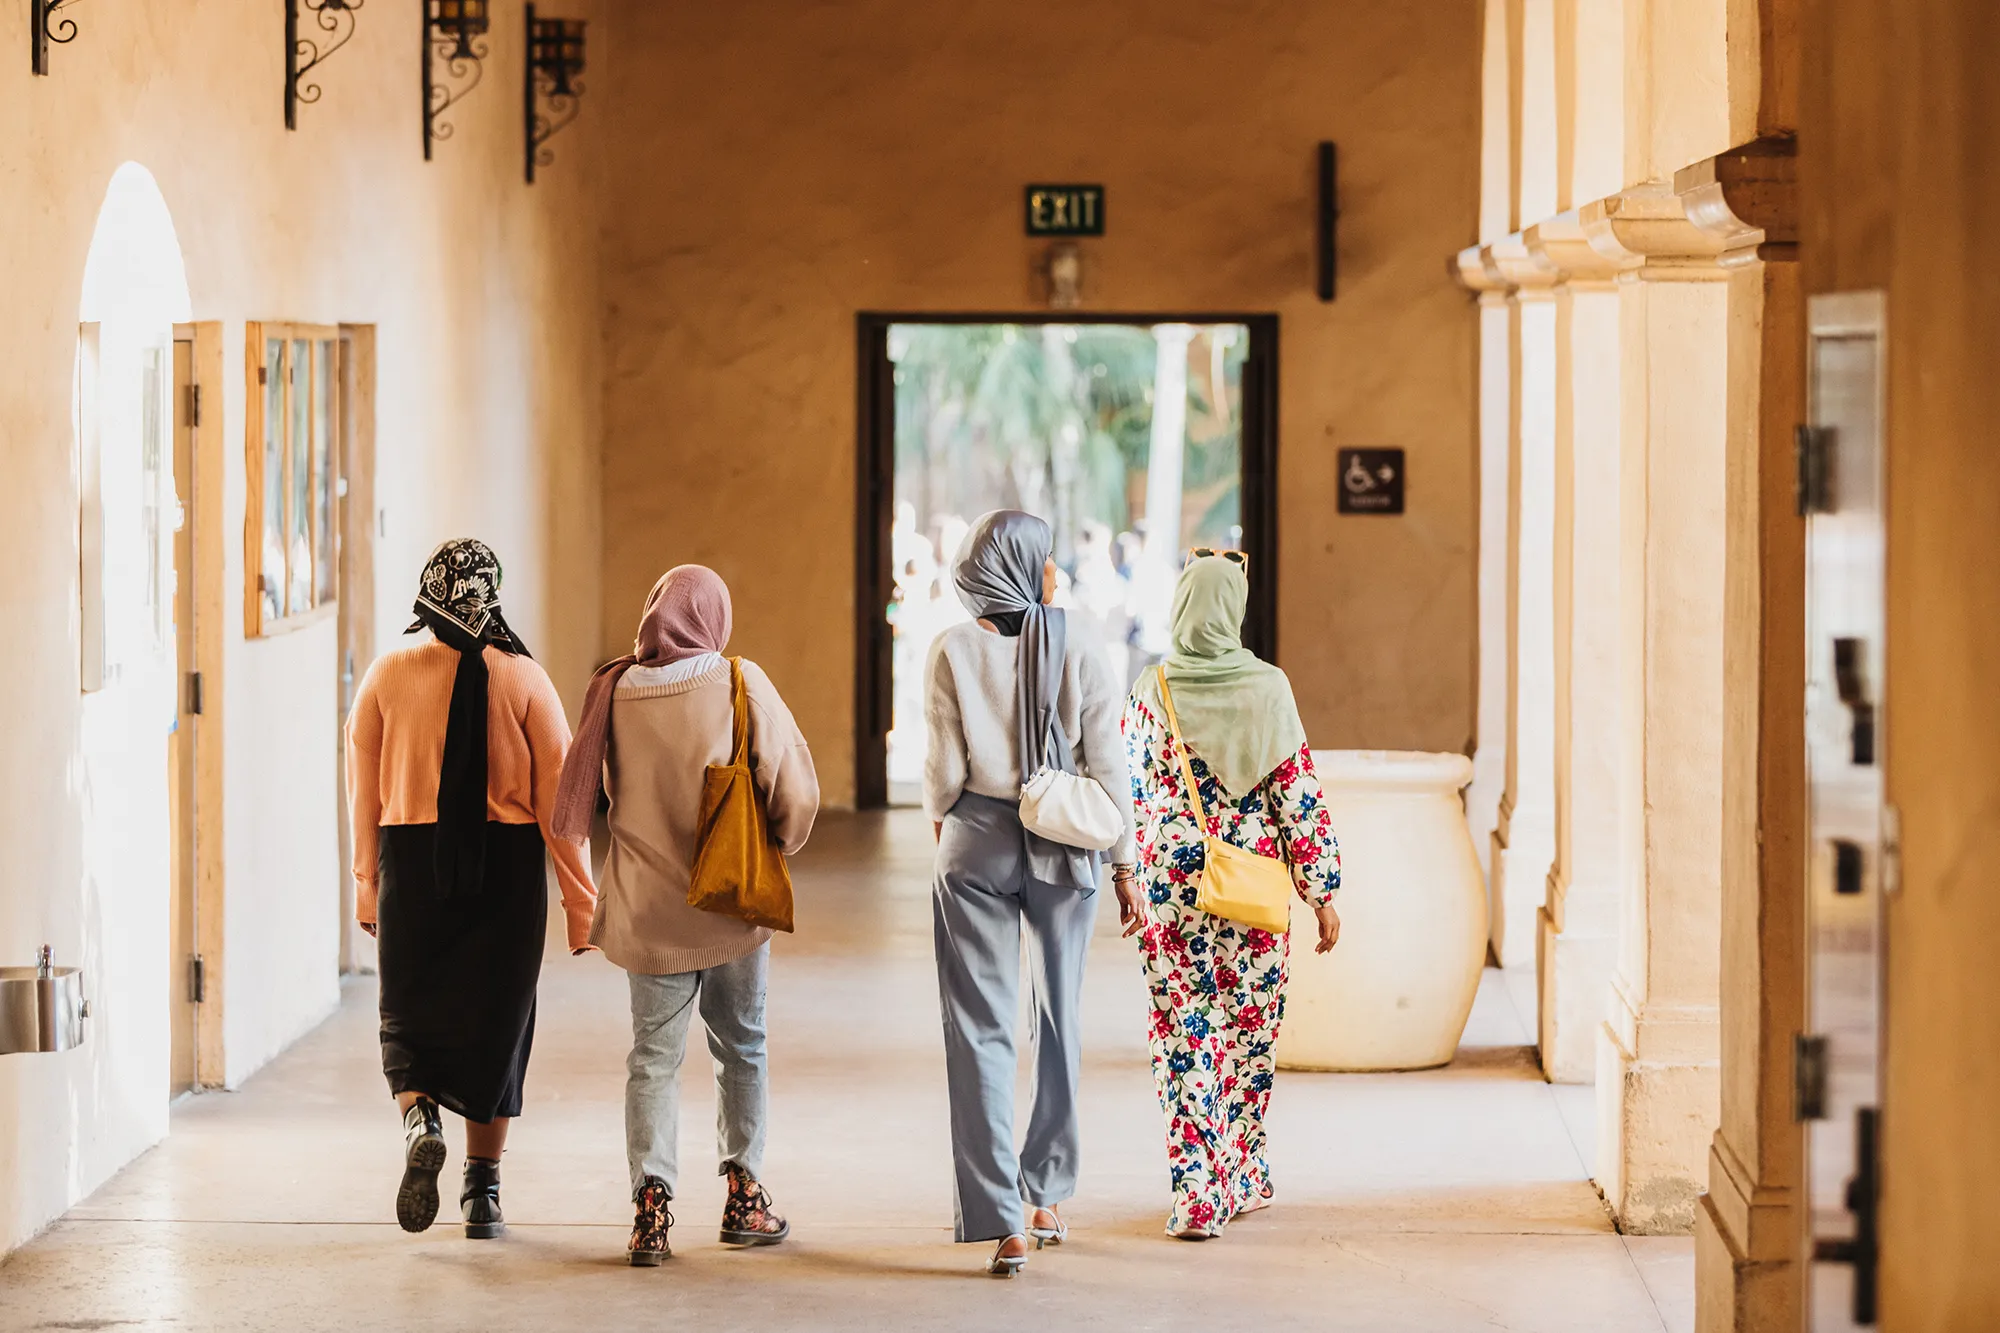 Four people with head-coverings walking down a hallway in Balboa Park.